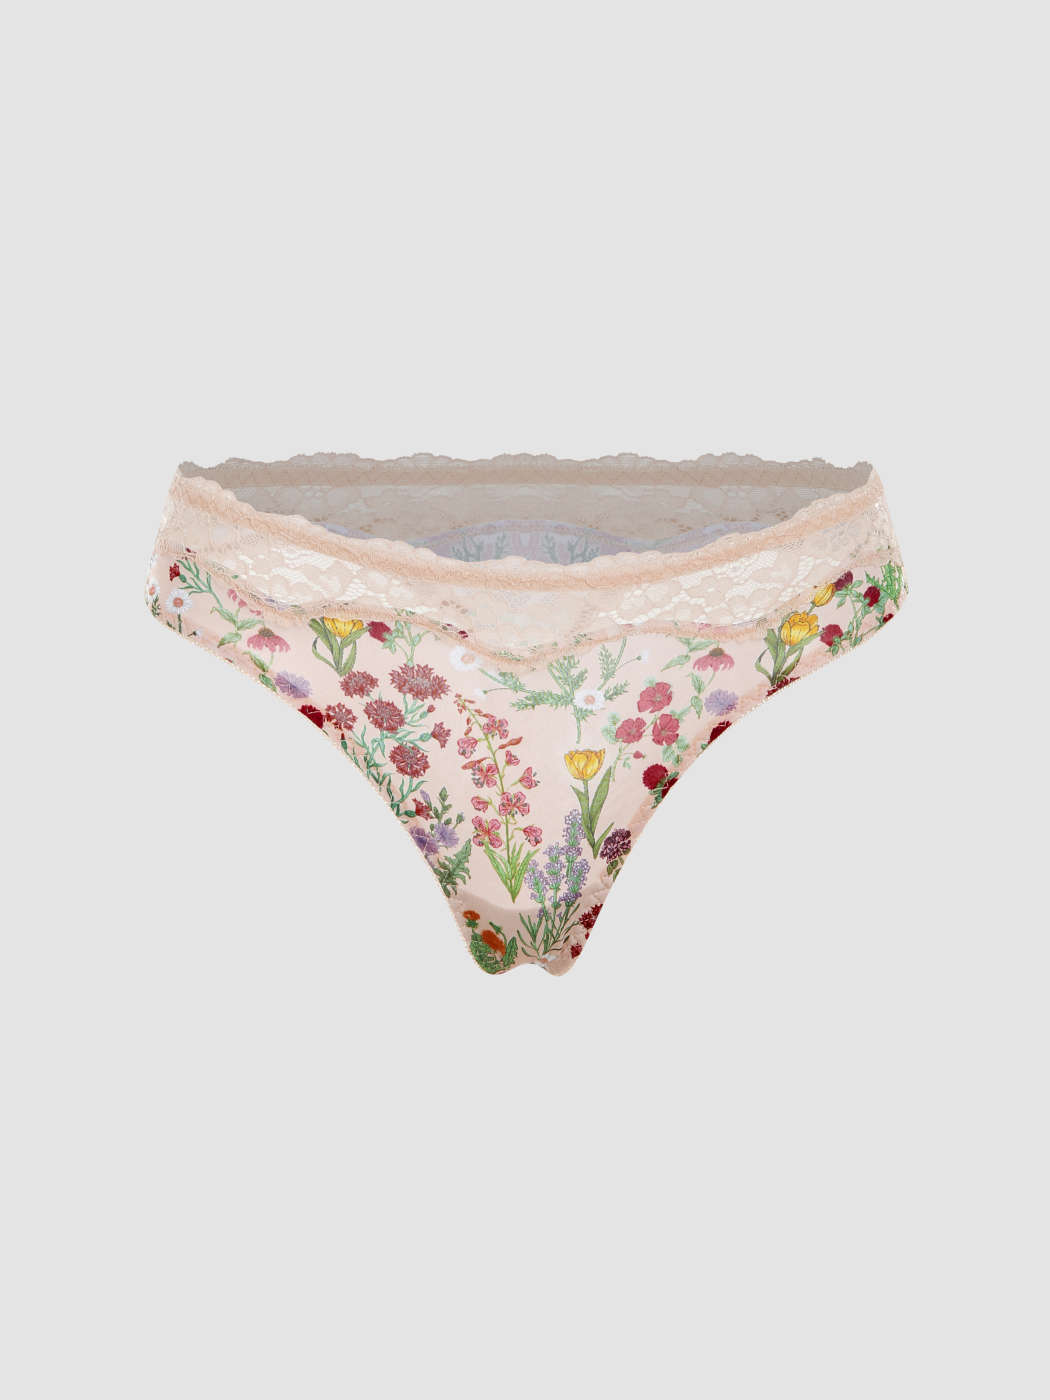 Jersey Floral Lace Patched Panty - Cider